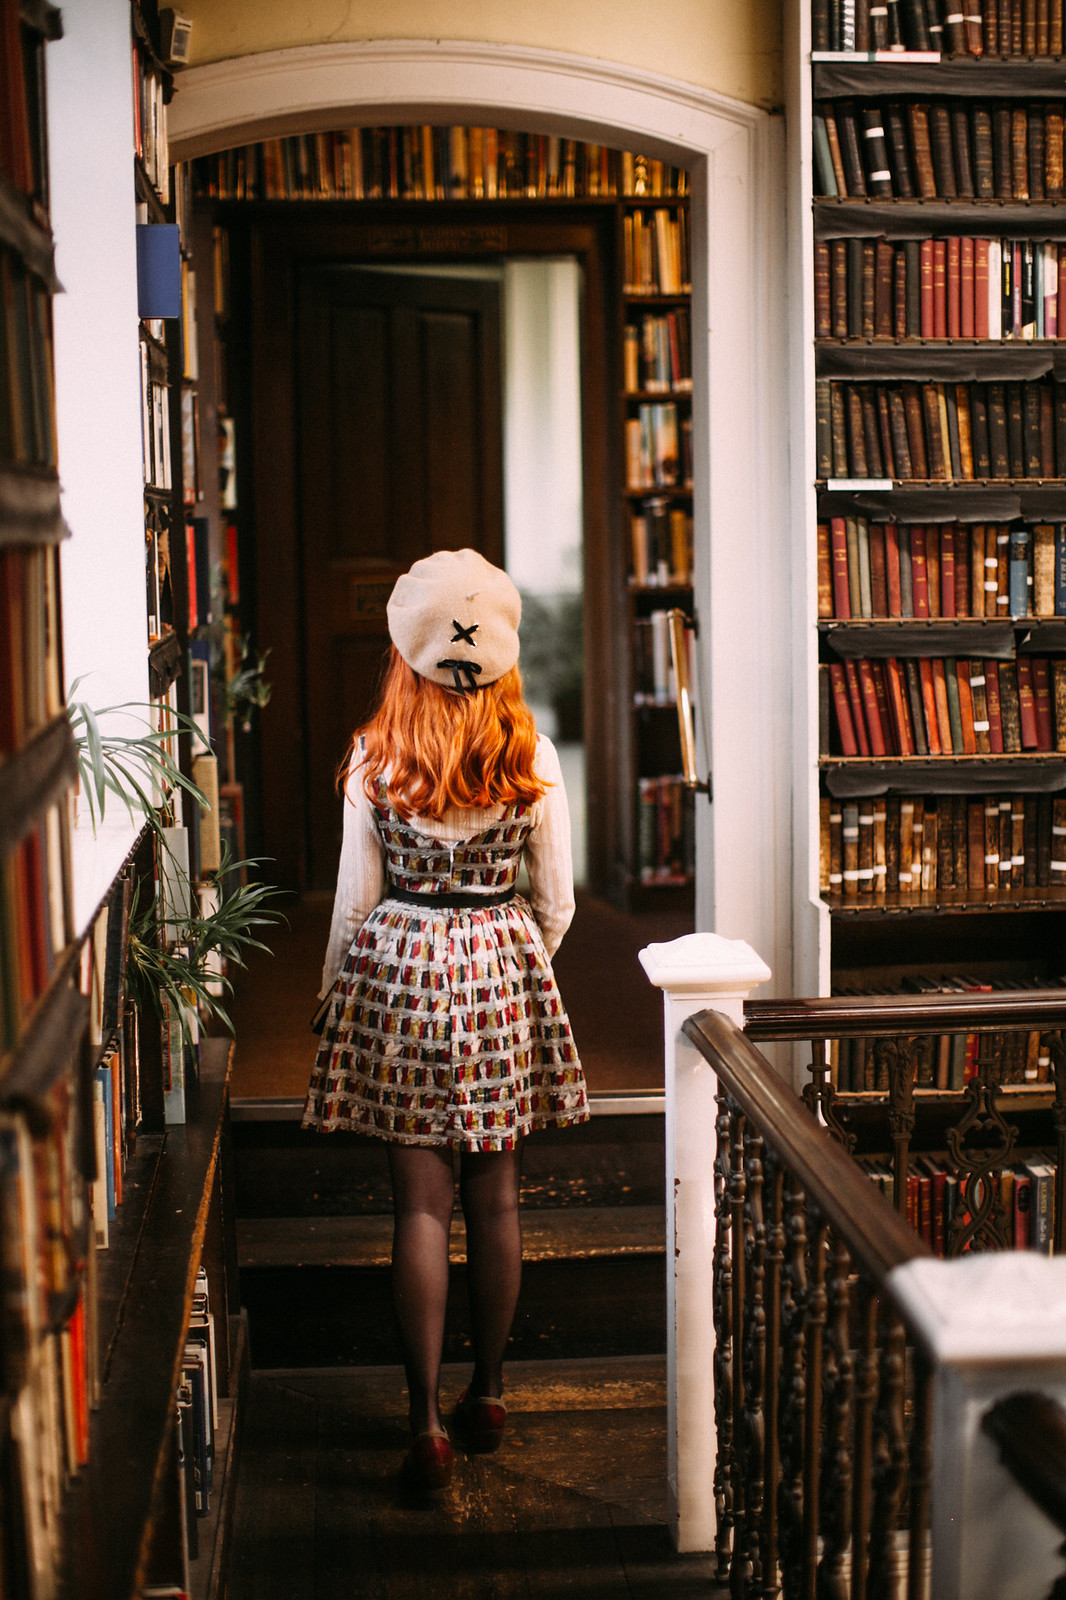 bromley house library, library goals, nottingham, english libraries, uk travel blogger